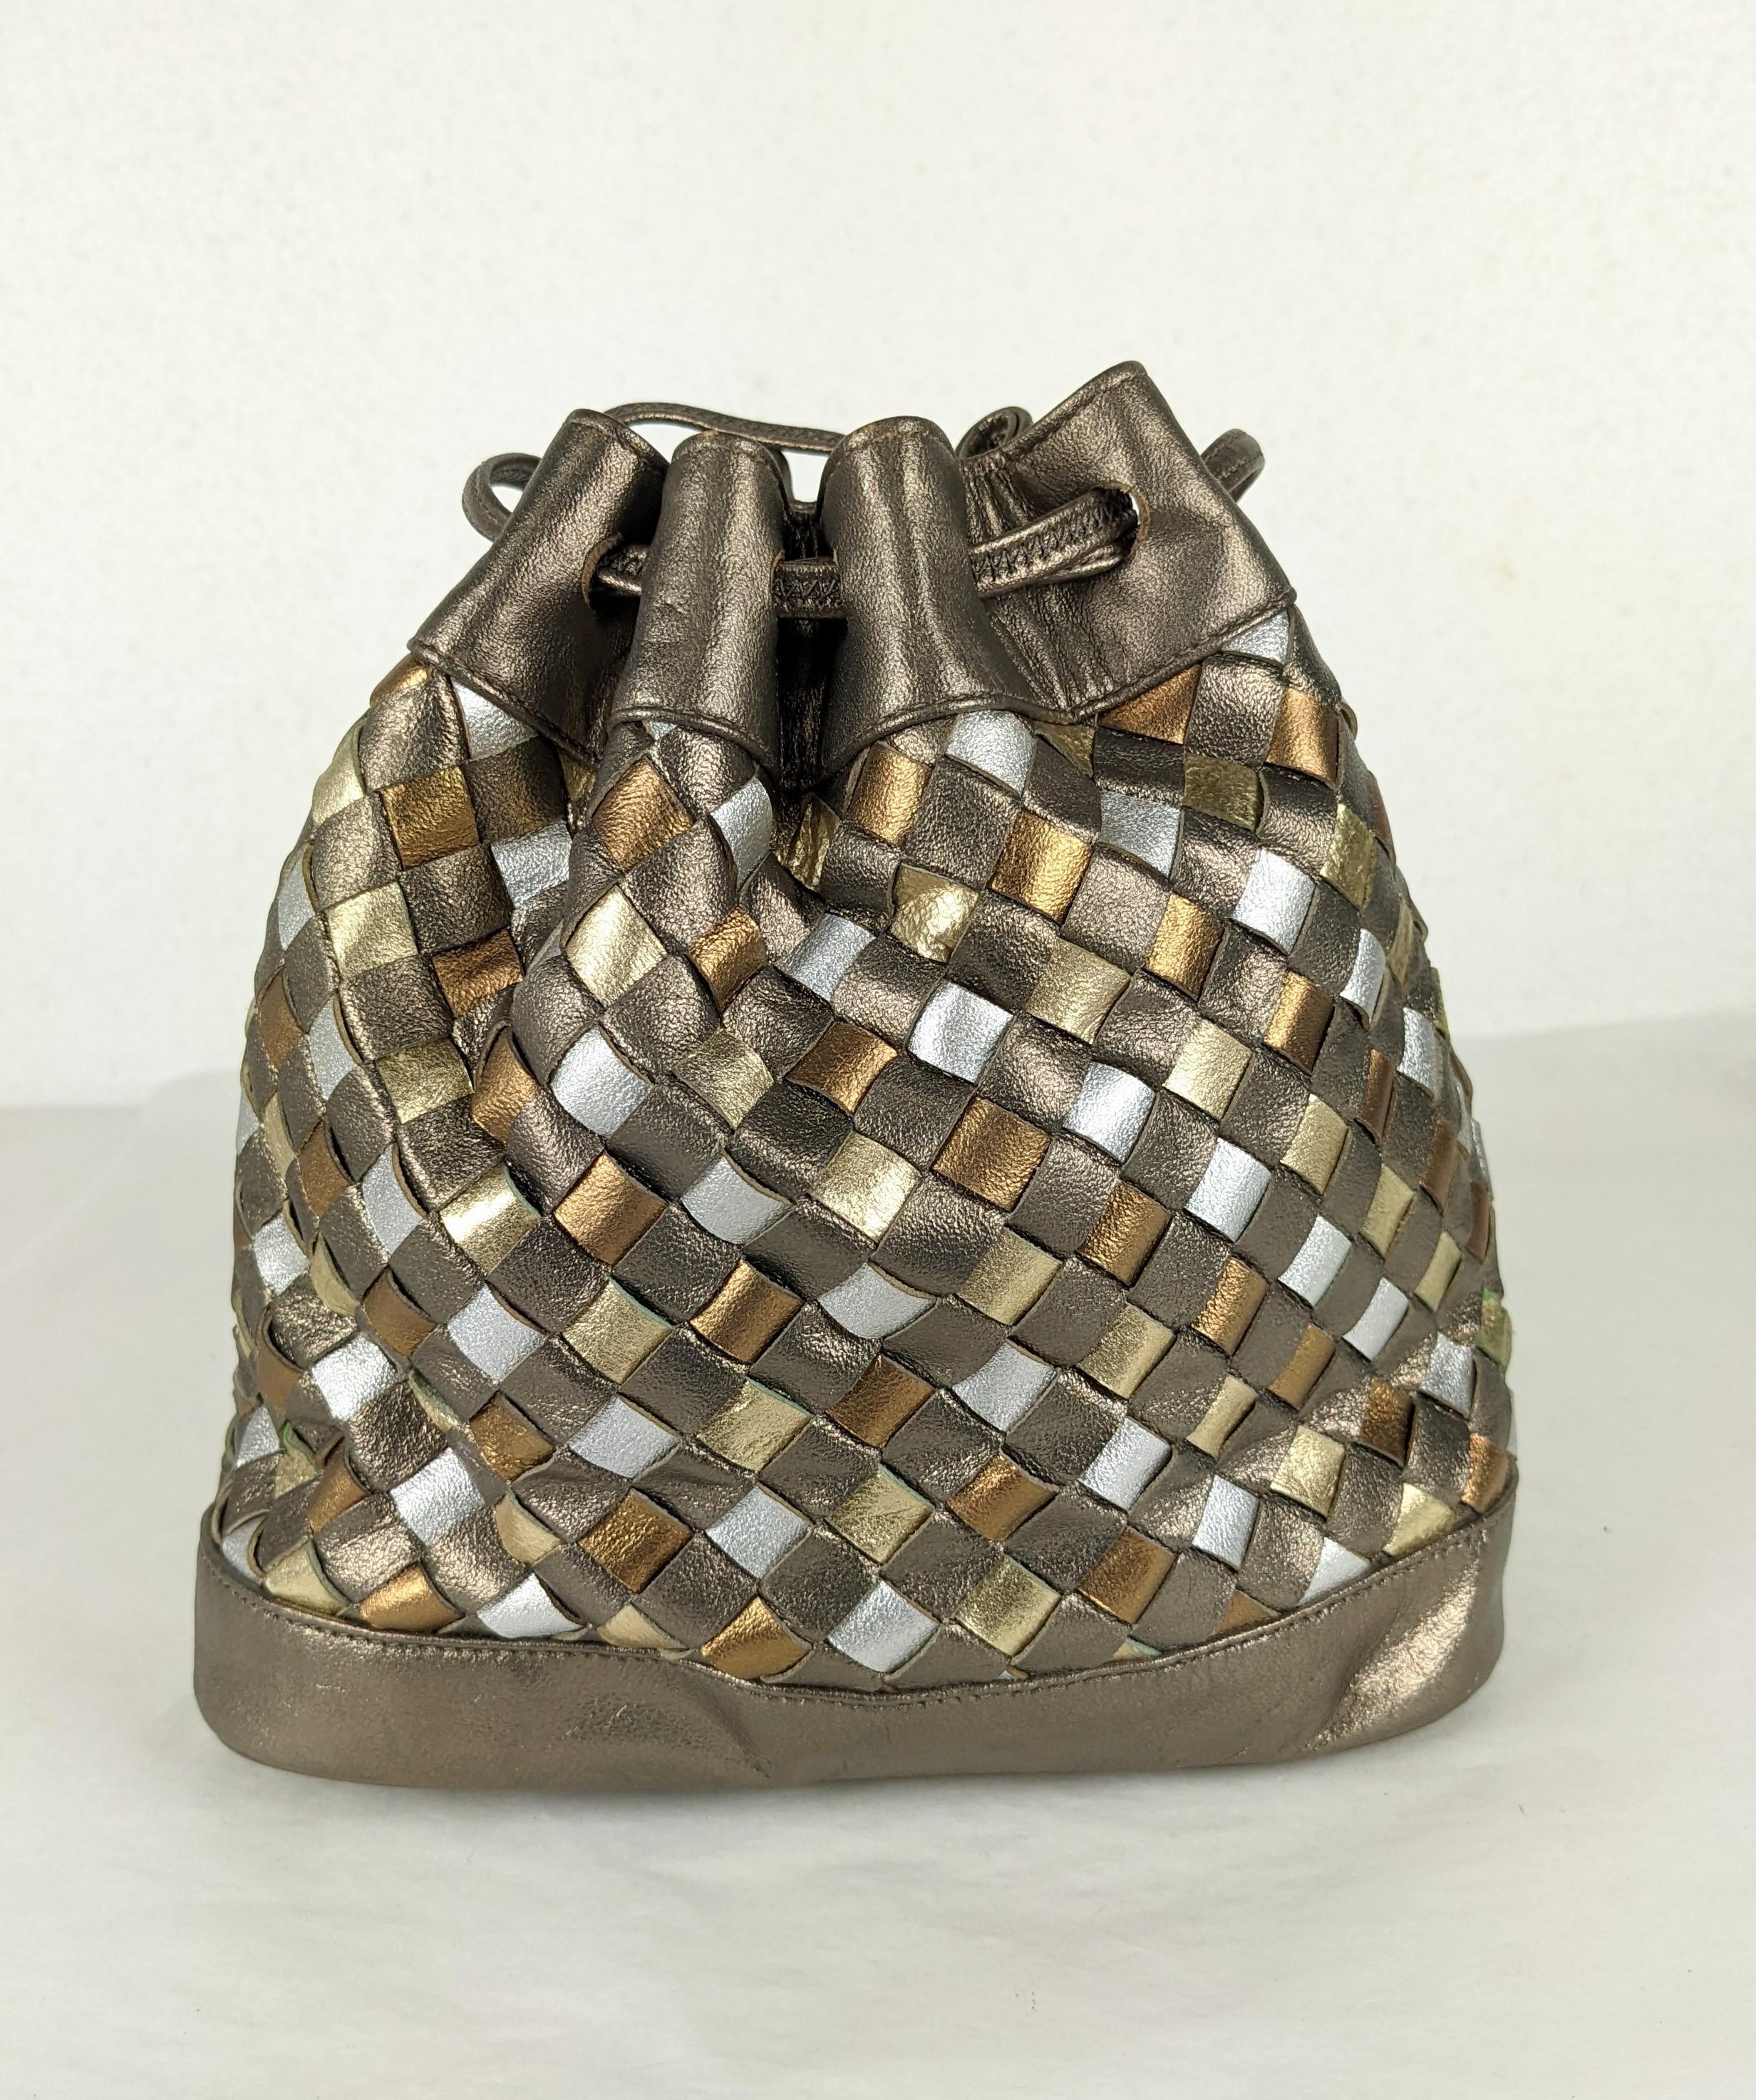 Metallic Leather Woven Shoulder Pouch by Morris Moskowitz. Strips of silver, bronze and and brass toned leather are woven and then formed into a mini drawstring pouch.
1990's USA. Fully lined. 6.5